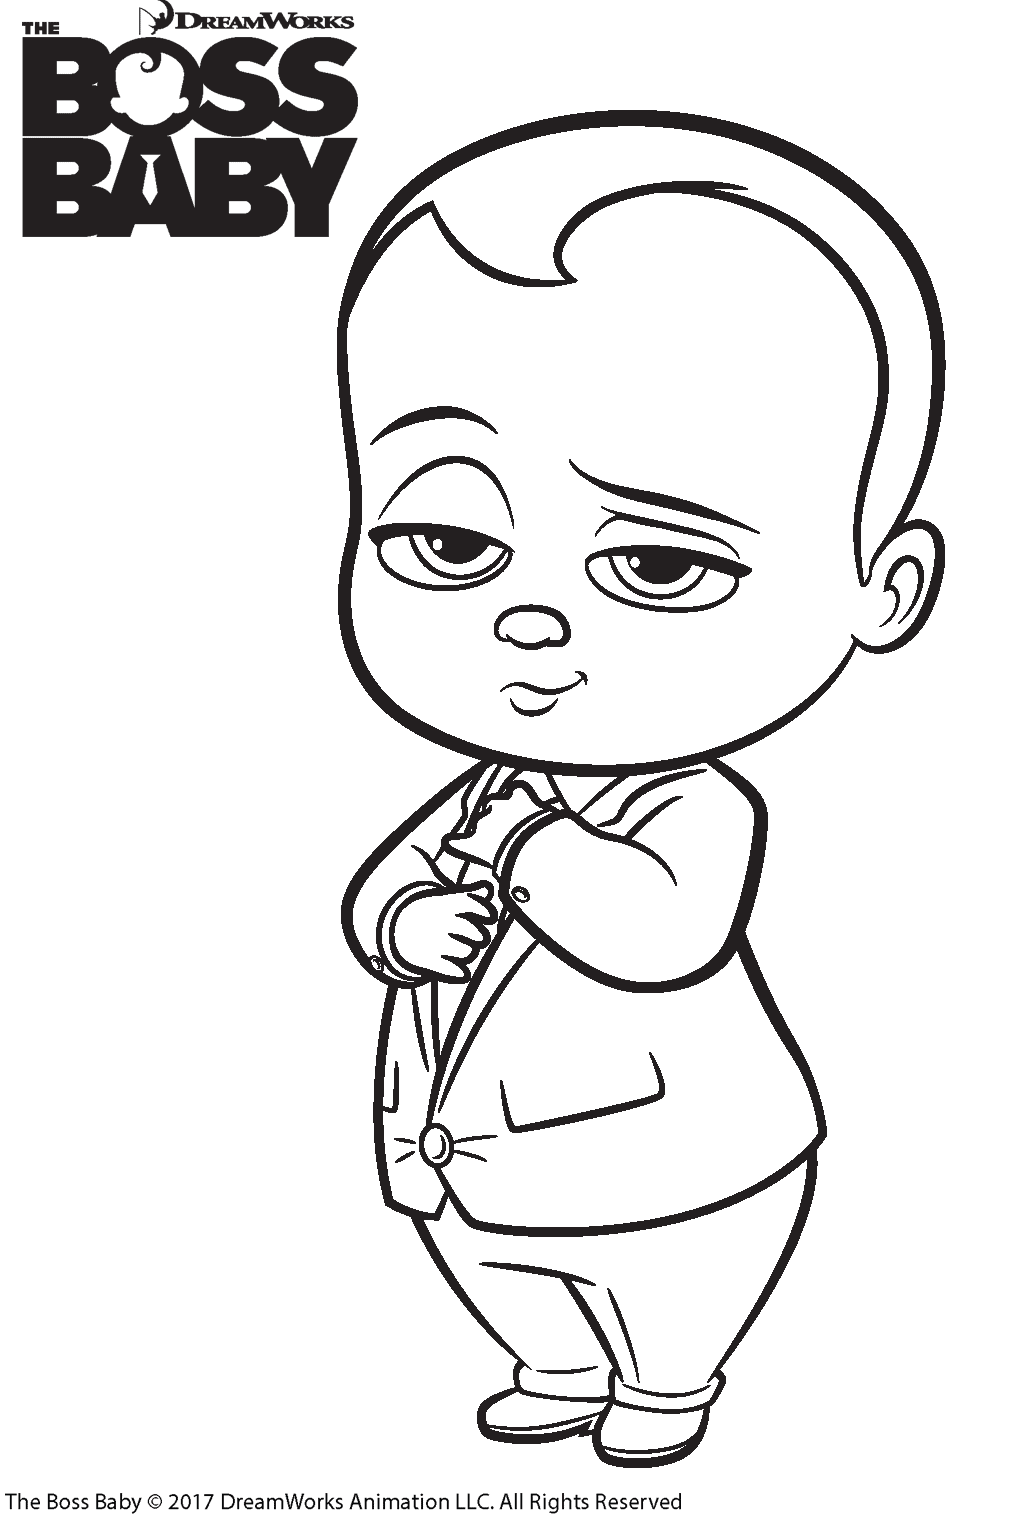 The Boss Baby 20 Coloring Pages   Coloring Cool